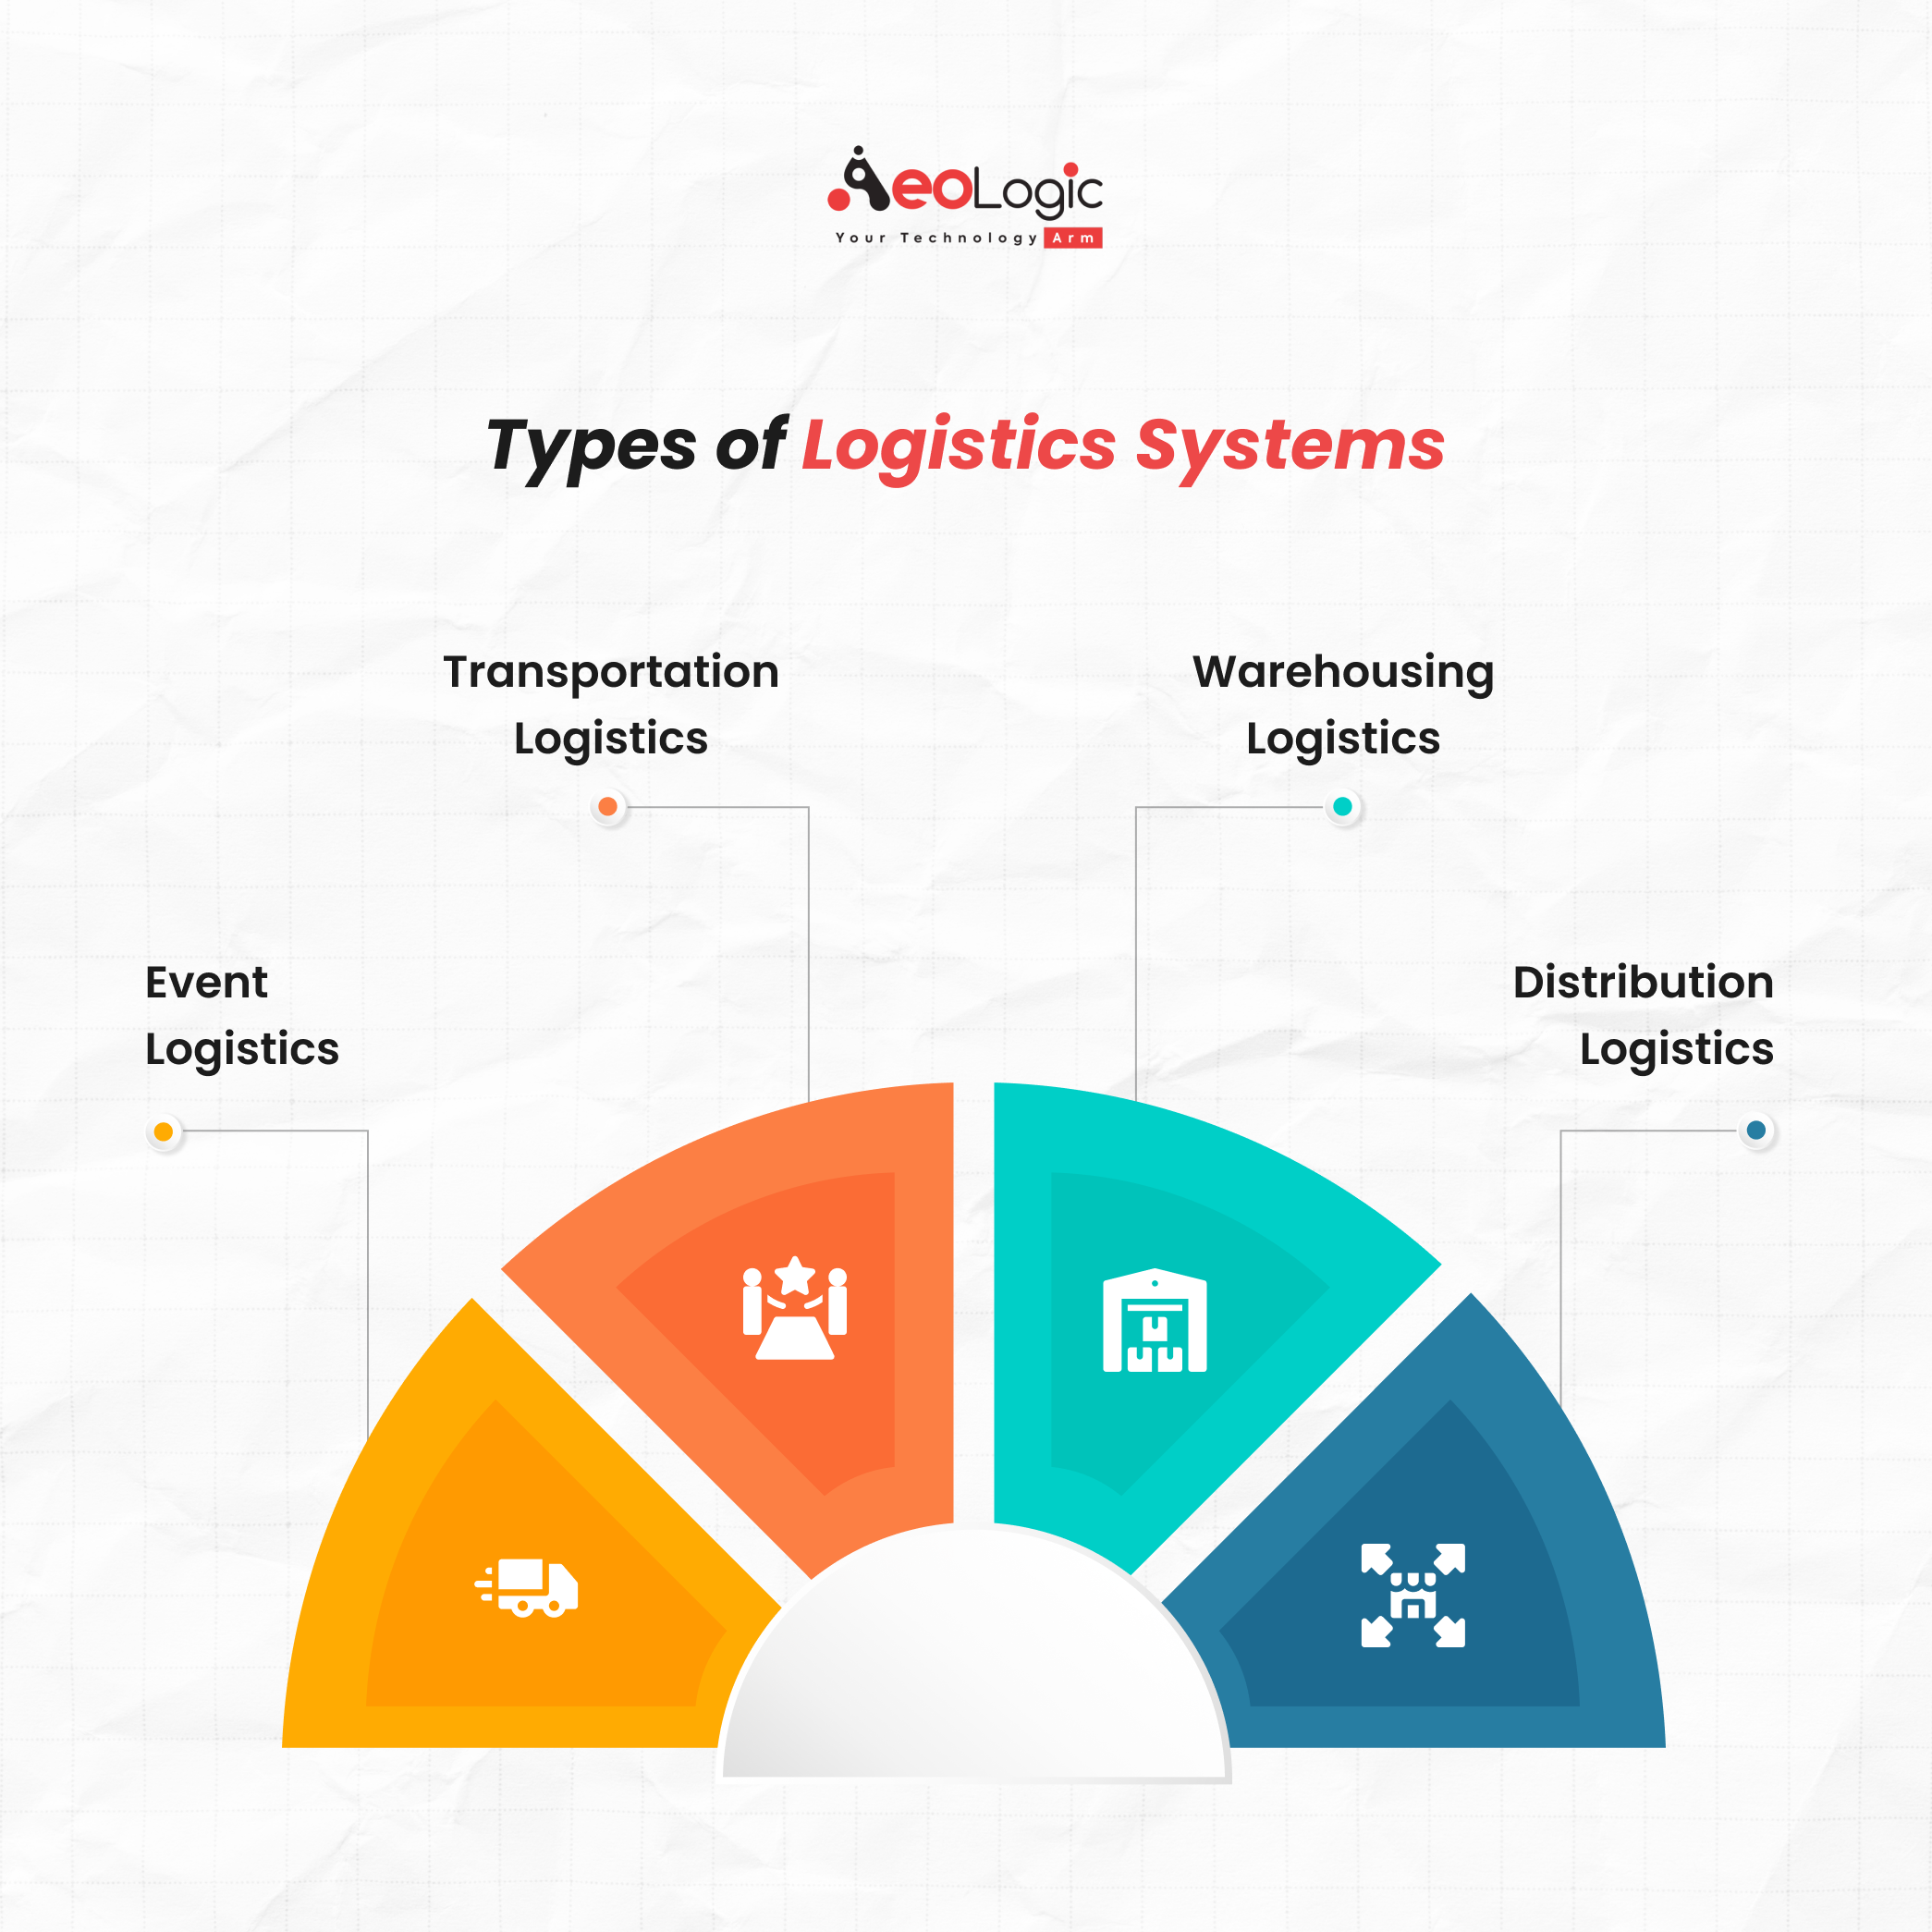 Types of Logistics Systems